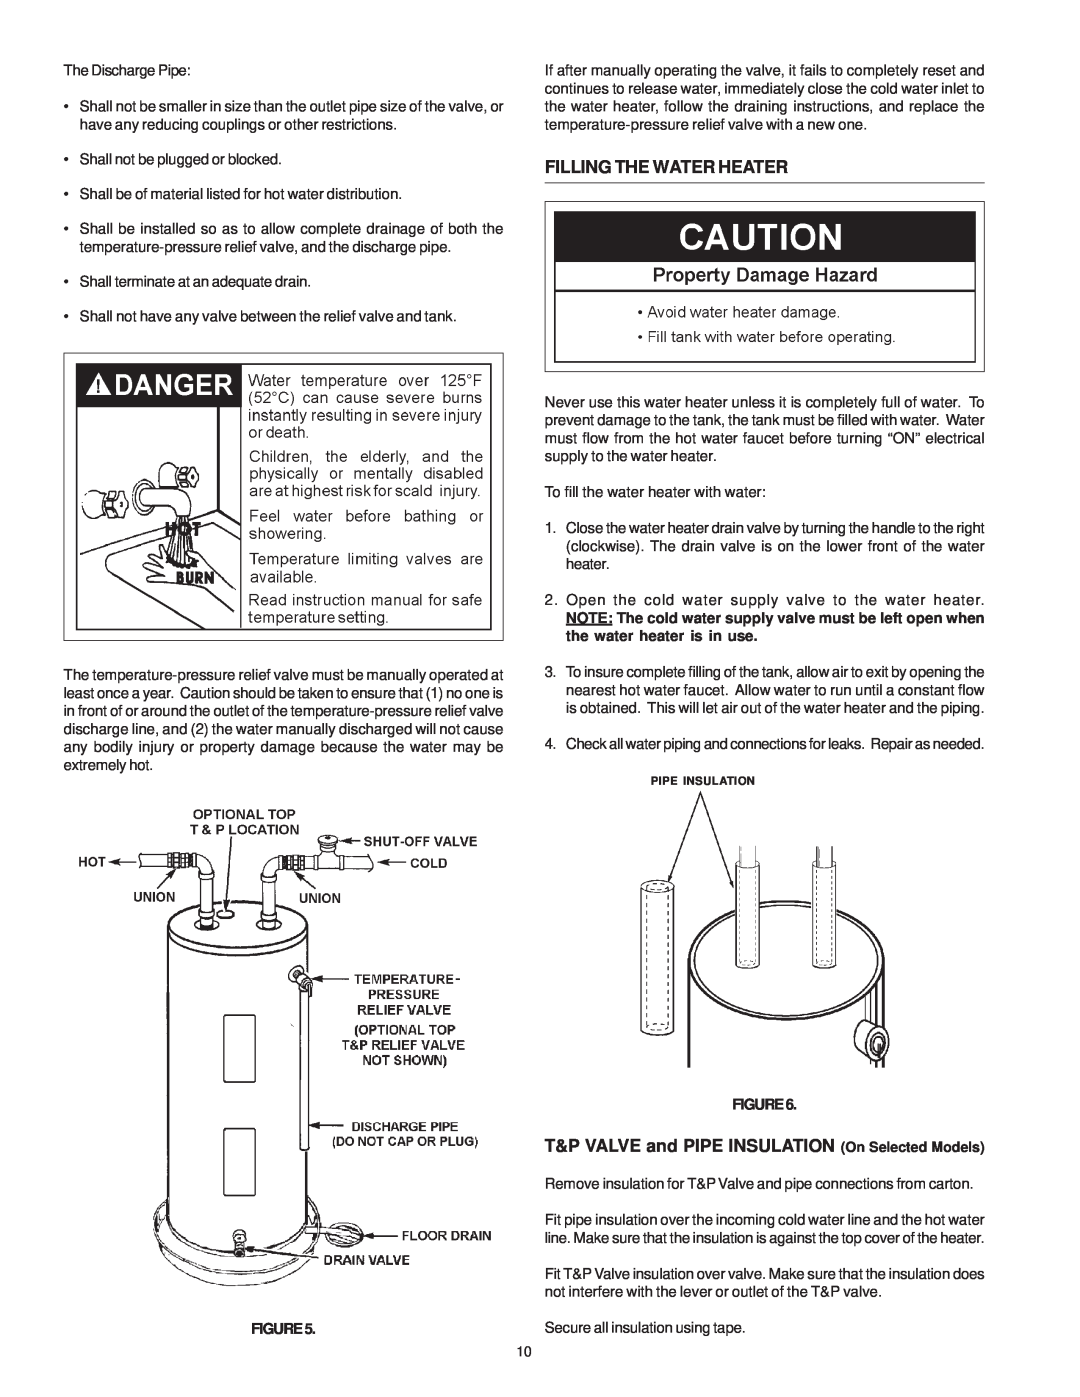 A.O. Smith WATER HEATERS instruction manual Filling The Water Heater, T&P VALVE and PIPE INSULATION On Selected Models 